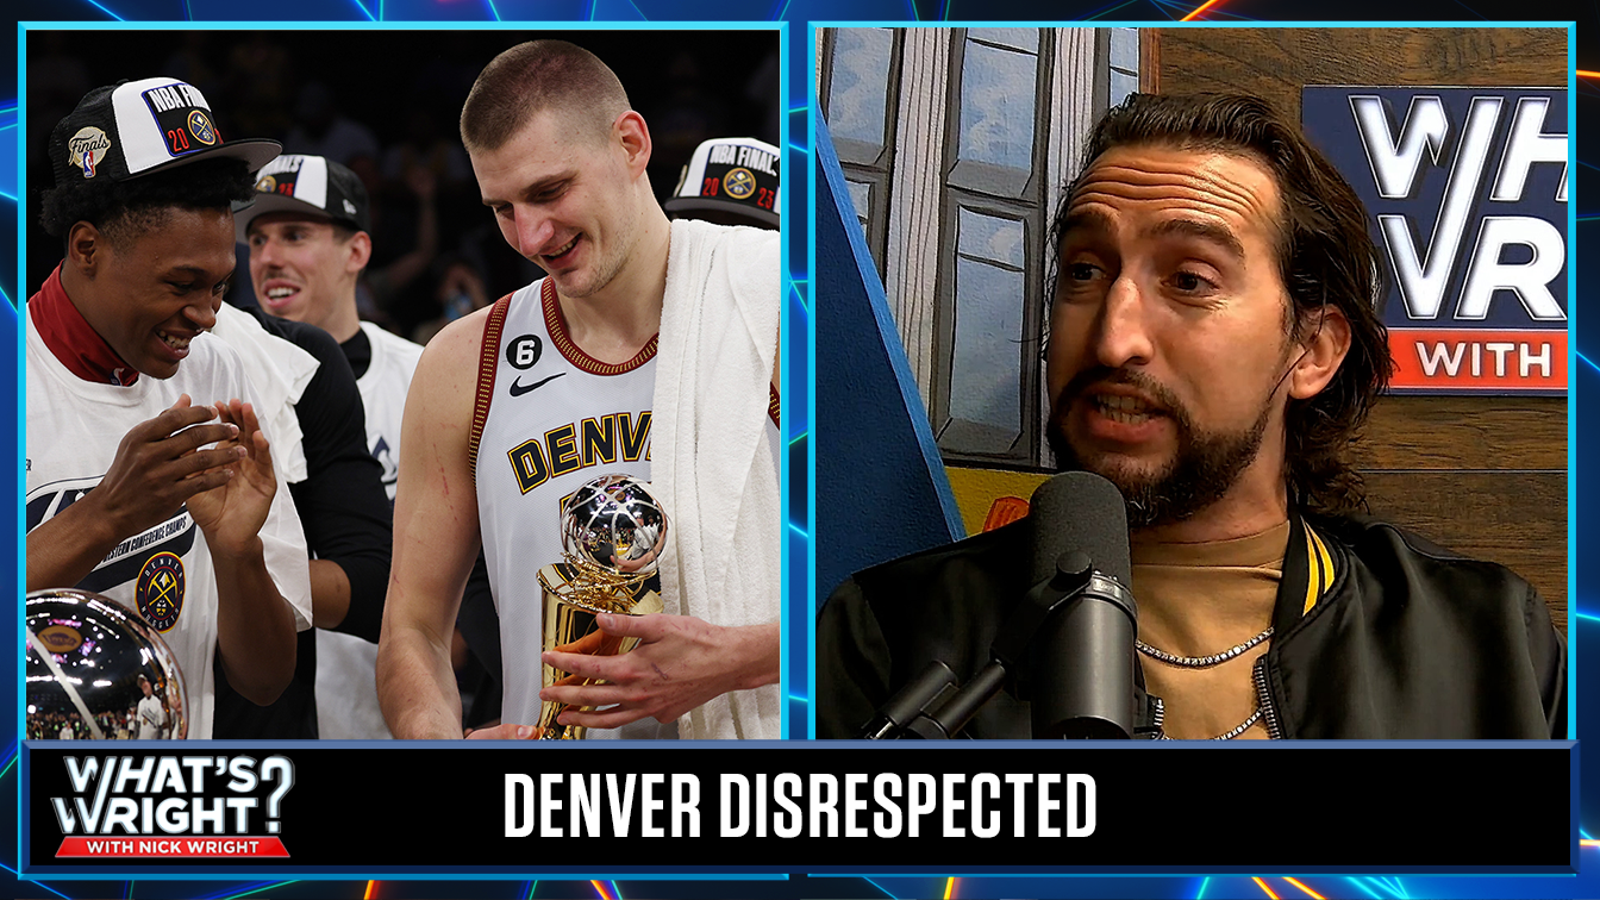 Does Nick owe Jokić & Nuggets an apology after sweeping Lakers? 